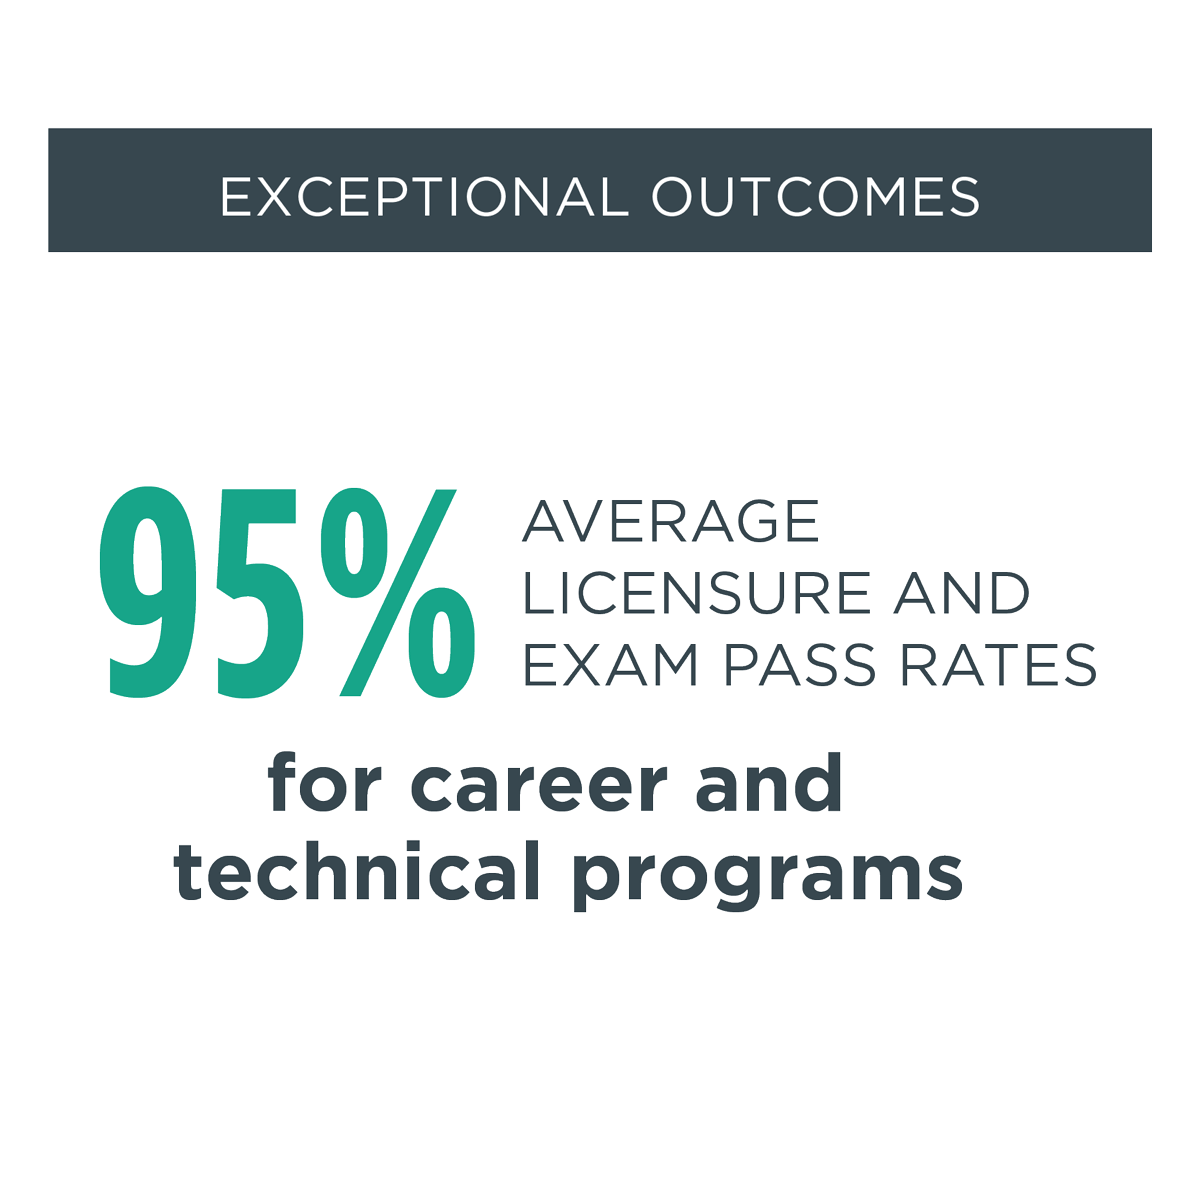 exceptional outcomes - 95% Average licensure and exam pass rates for career and technical programs